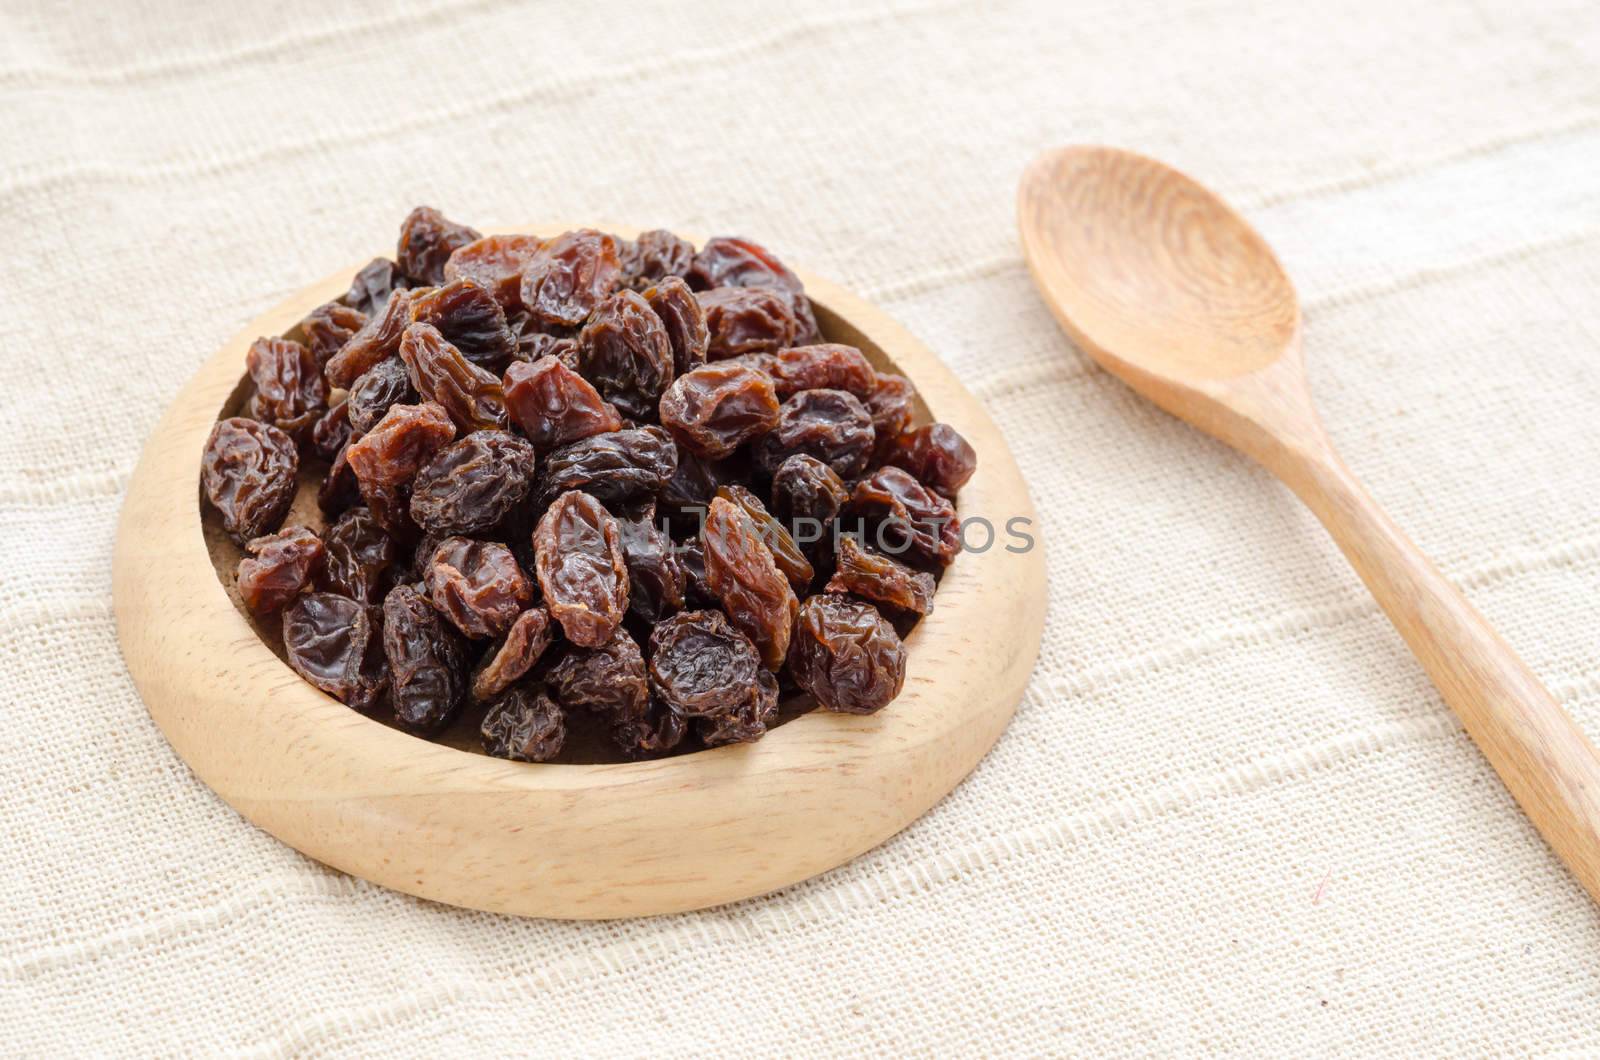 Raisins in wood dish with wooden spoon on tablecloth.